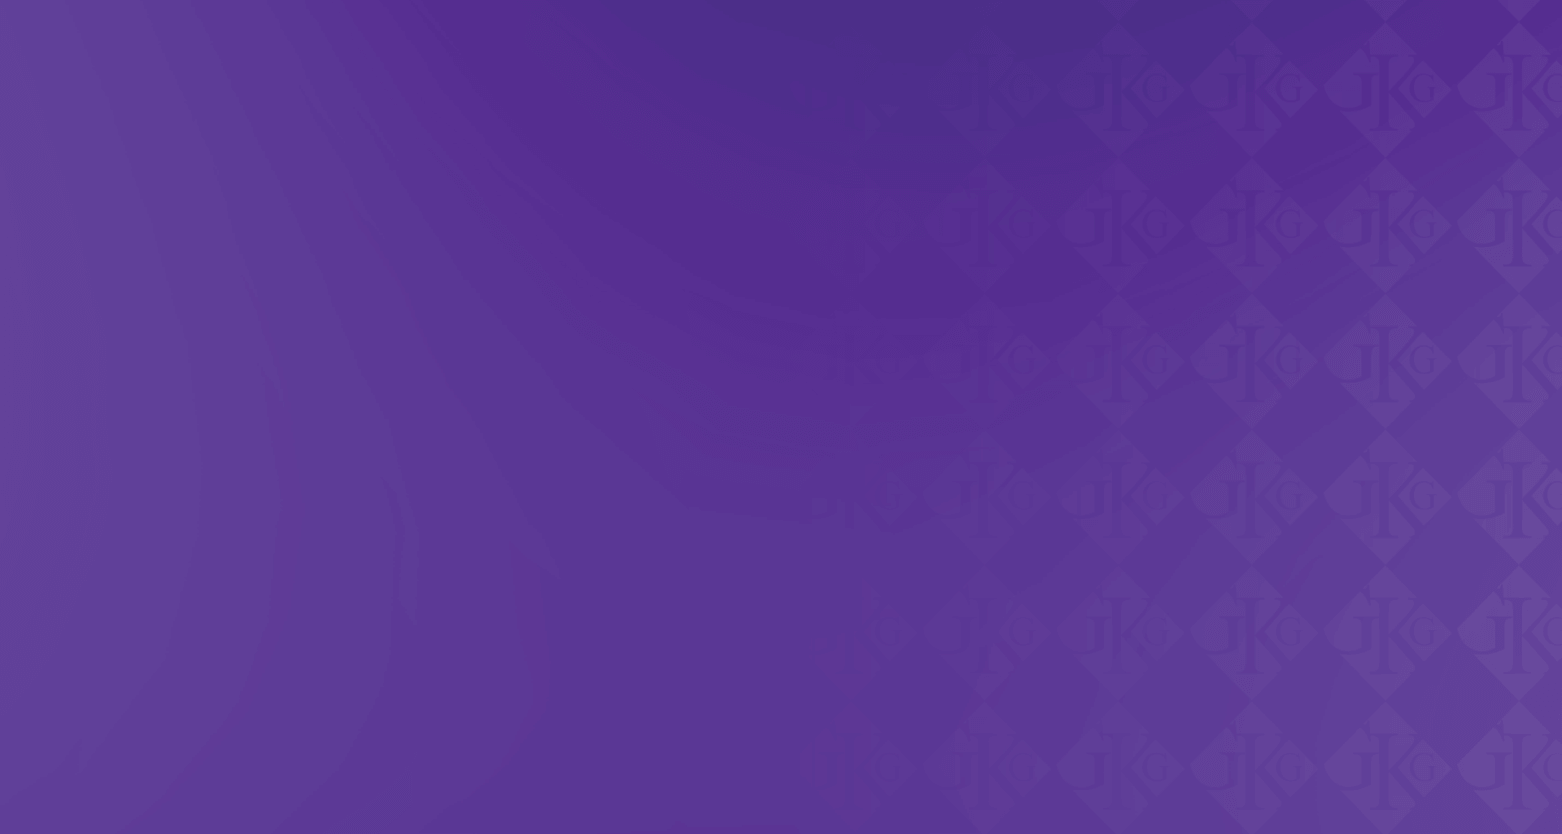 Abstract purple gradient background with a subtle GKG logo pattern